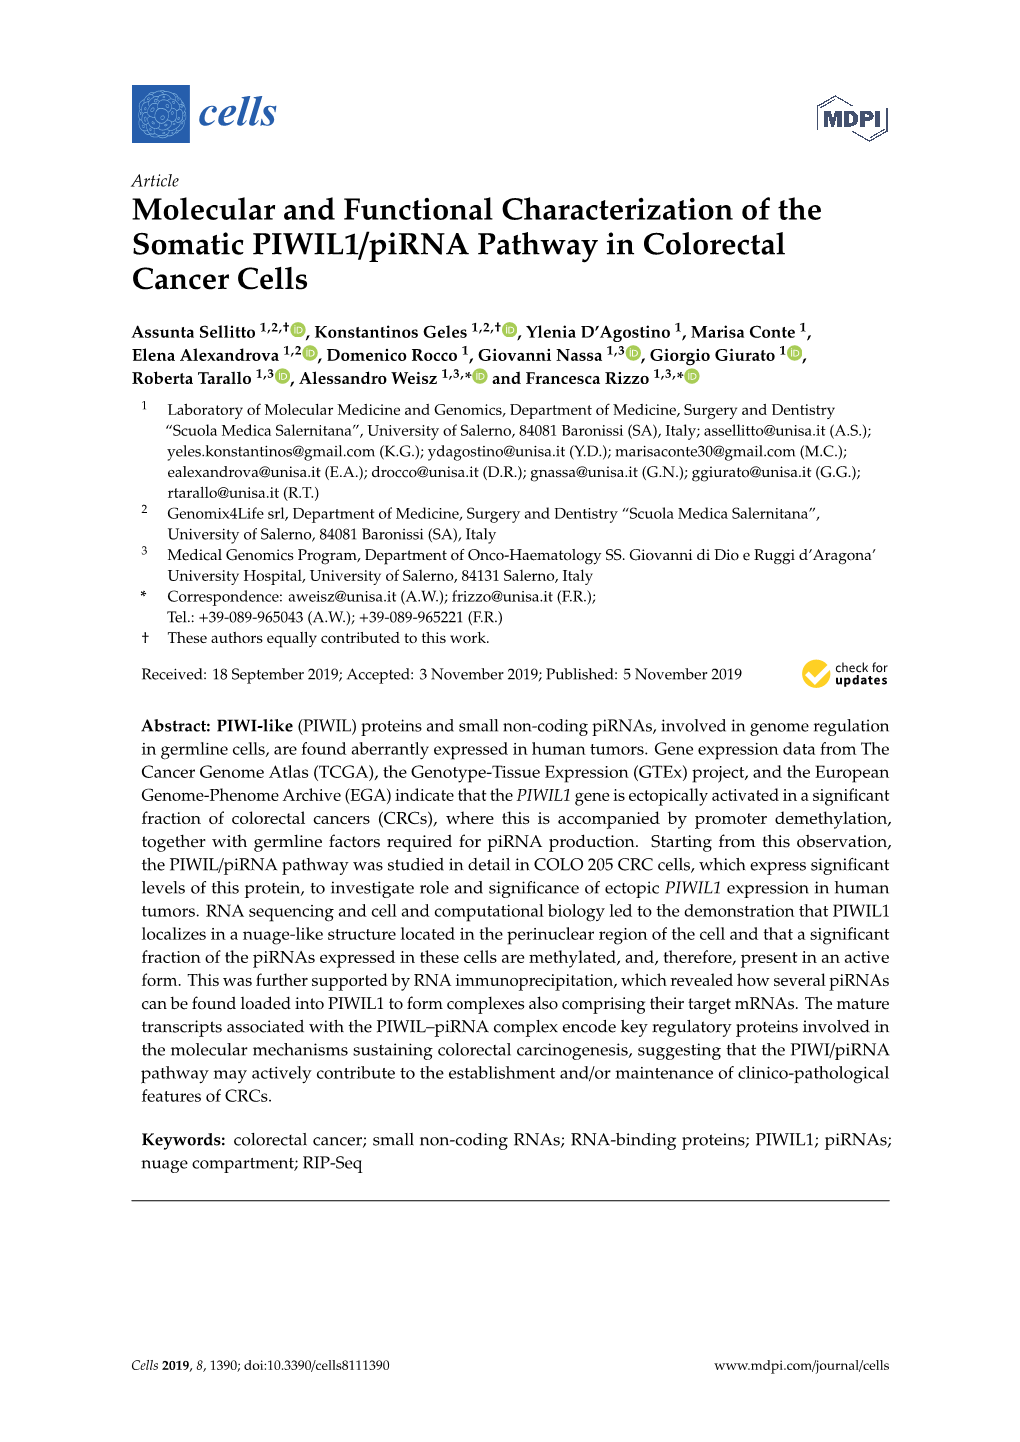 Molecular and Functional Characterization of the Somatic PIWIL1/Pirna Pathway in Colorectal Cancer Cells